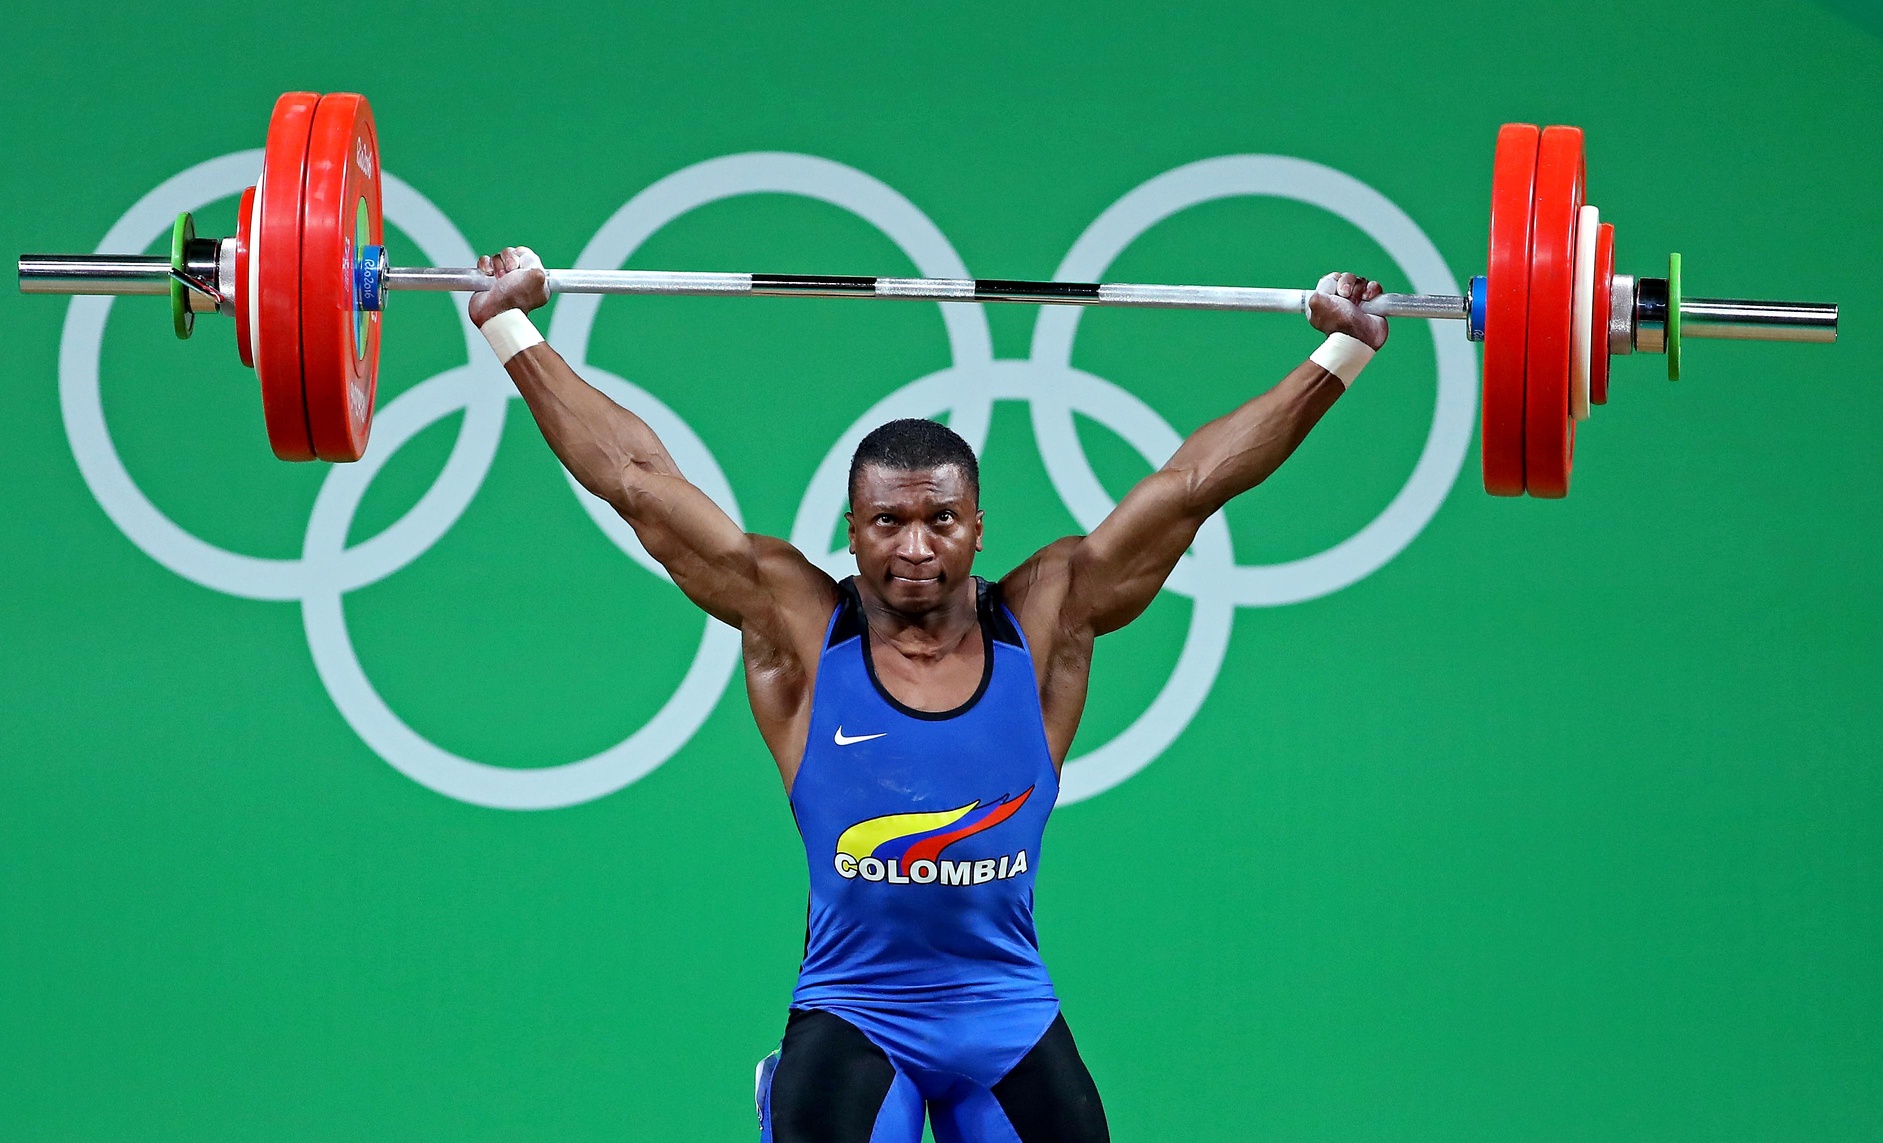 Colombia awarded weightlifting World Championships